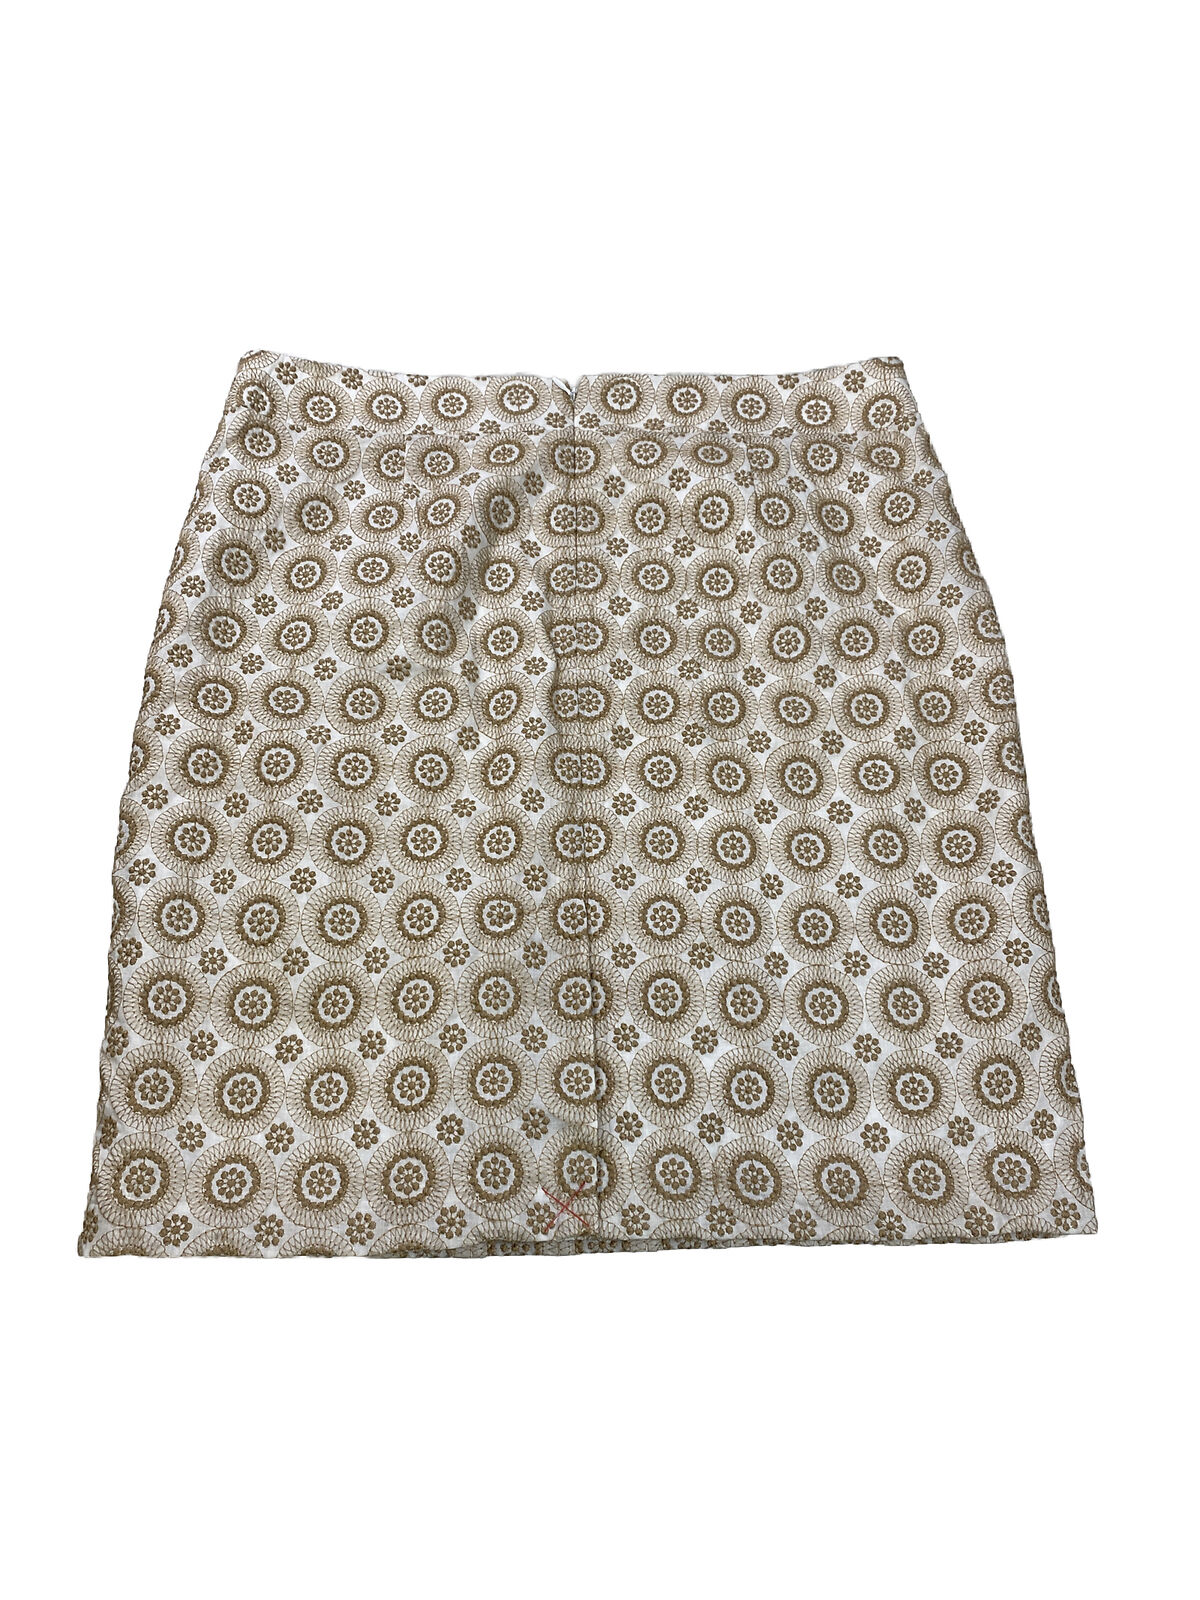 NEW Ann Taylor Women's Beige Embroidered  Straight Pencil Skirt - 16